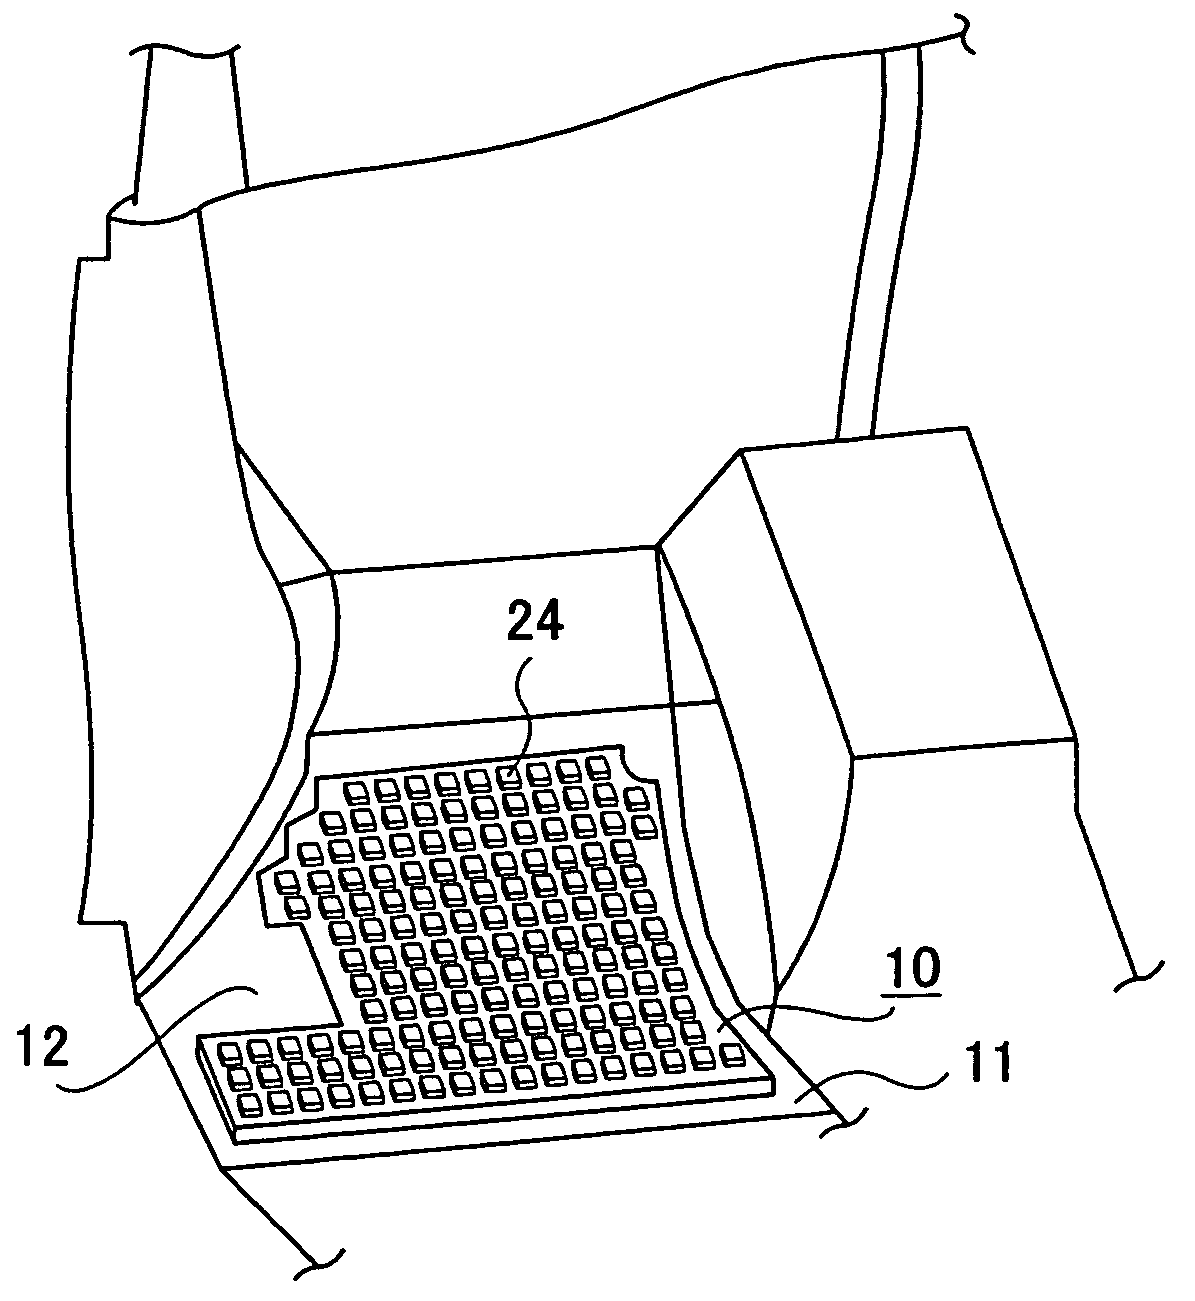 Shock absorption pad for a vehicle